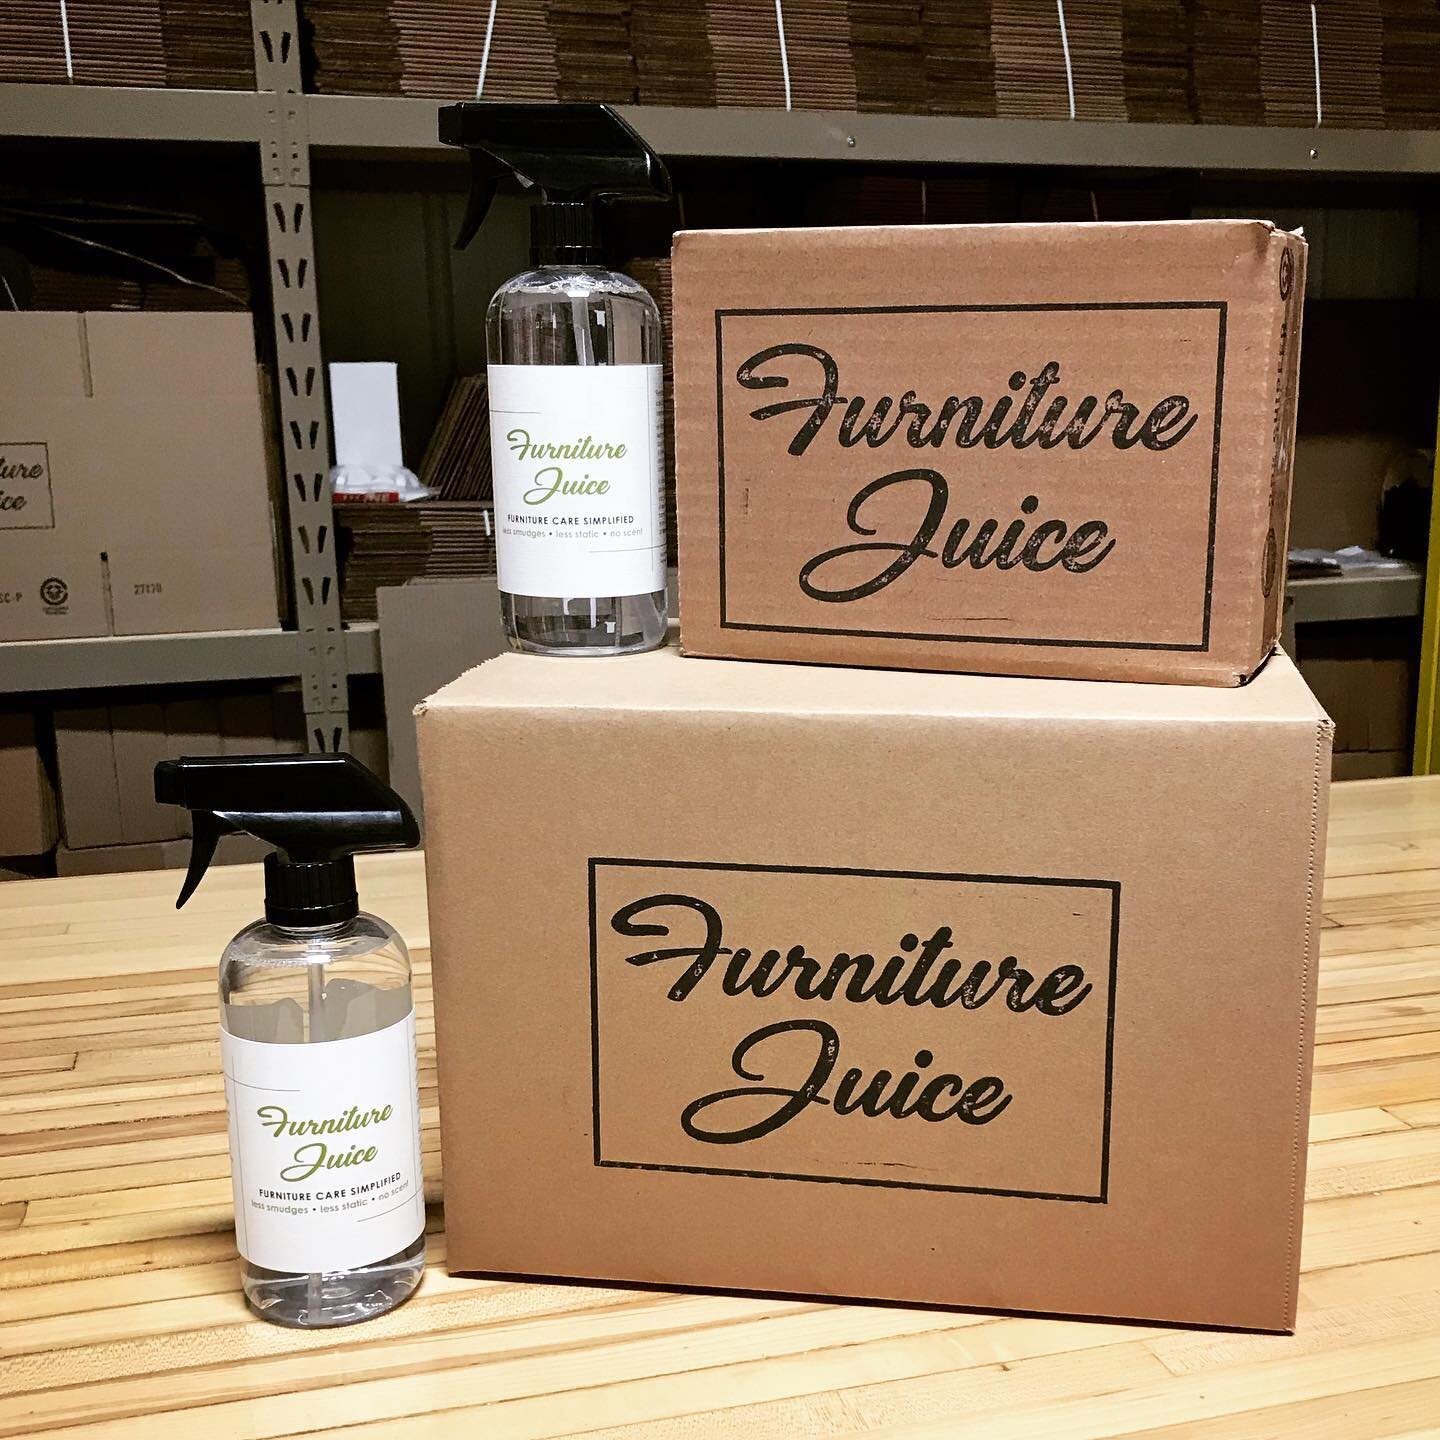 Packaging some Furniture Juice!  Our 1-2 pack shipping boxes and cases of 12.  #furniturecare #furniturecleaning #newproduct #furniturejuice www.niemeyerproducts.com